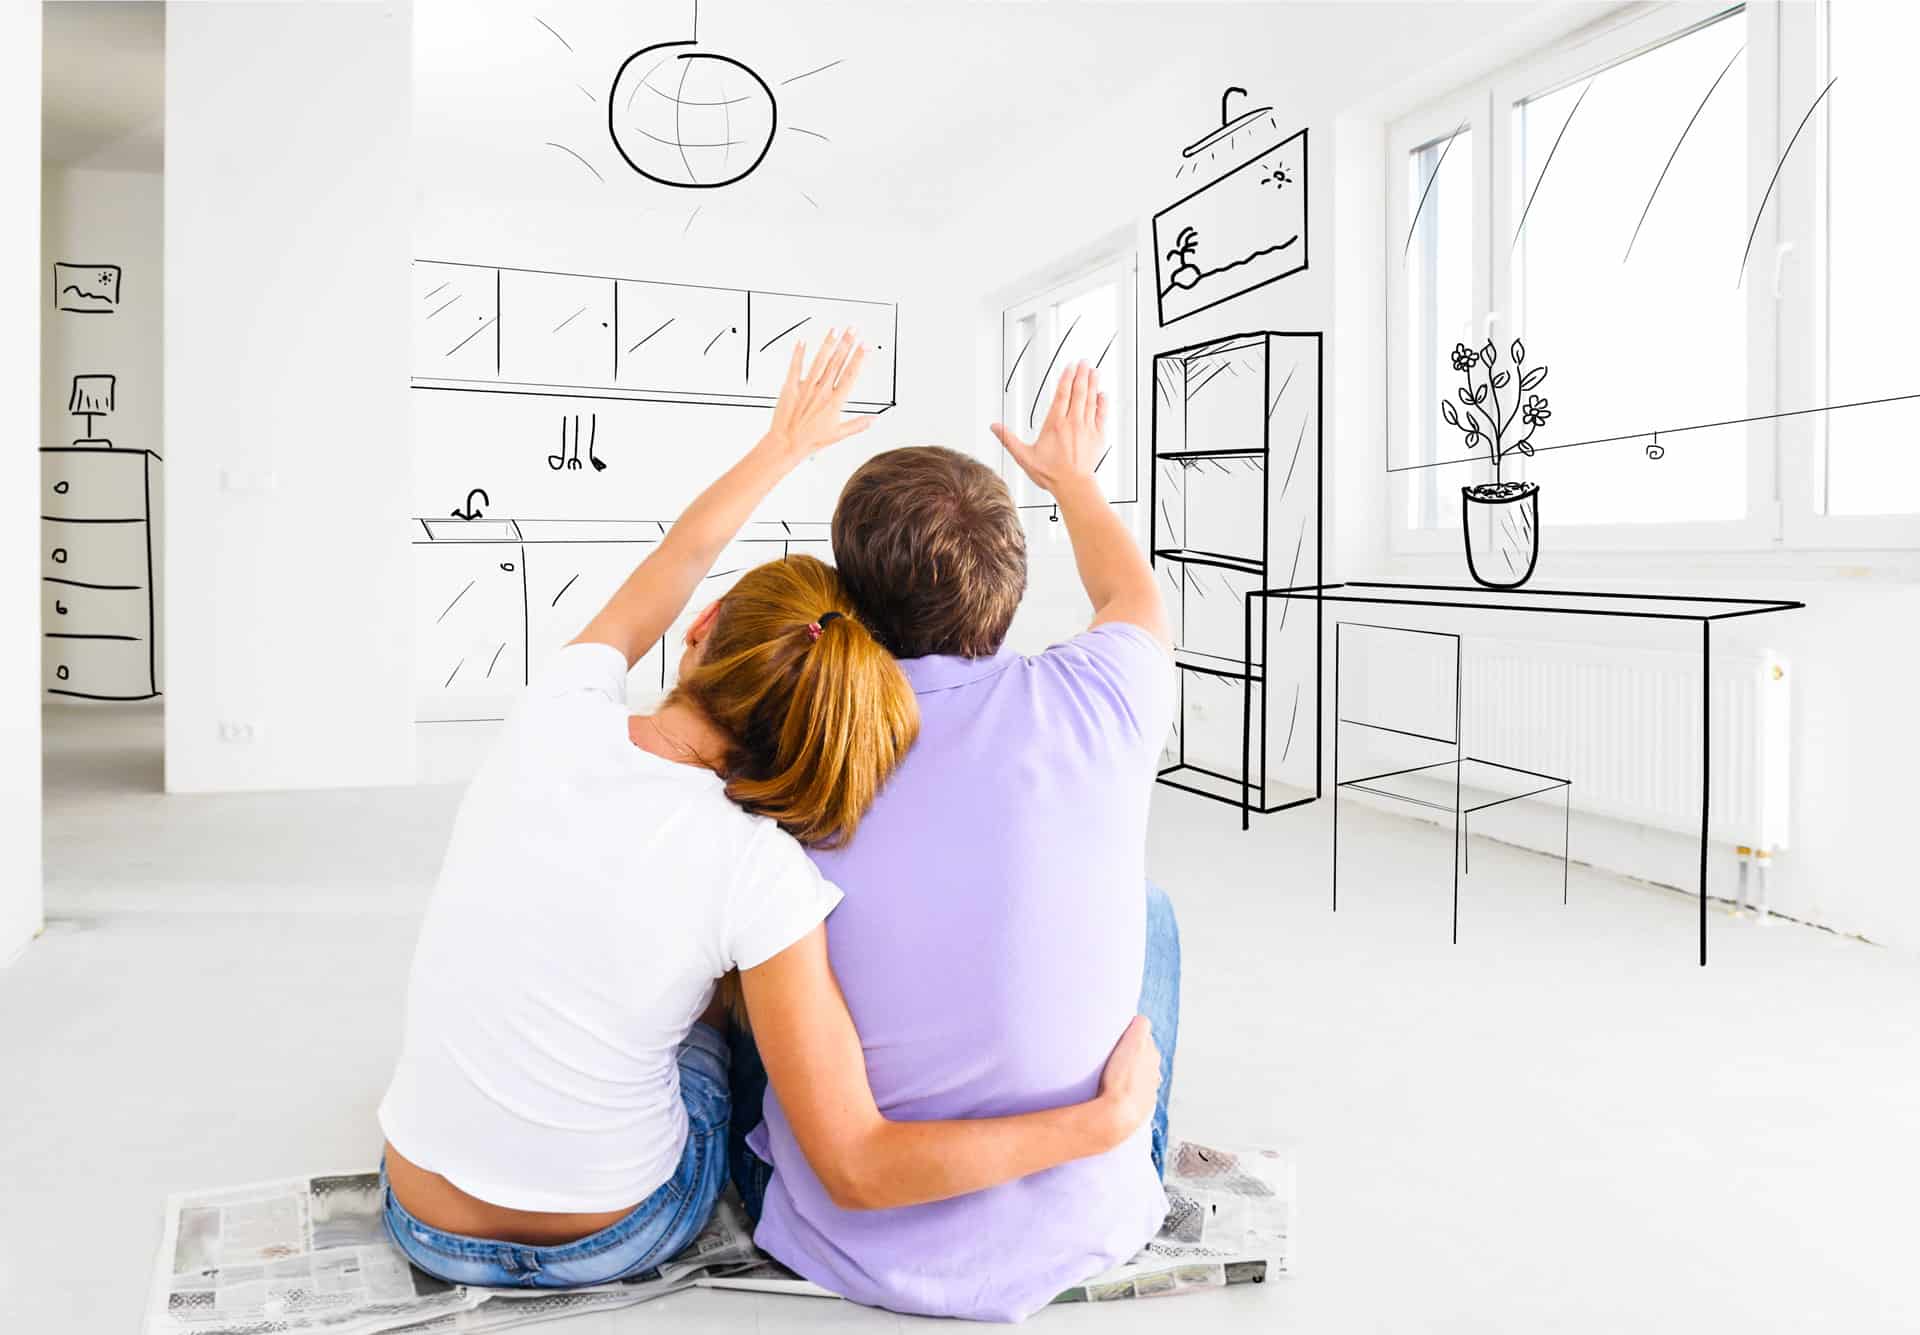 Candid Home Inspections - a happy couple imagining the interior design while buying a home